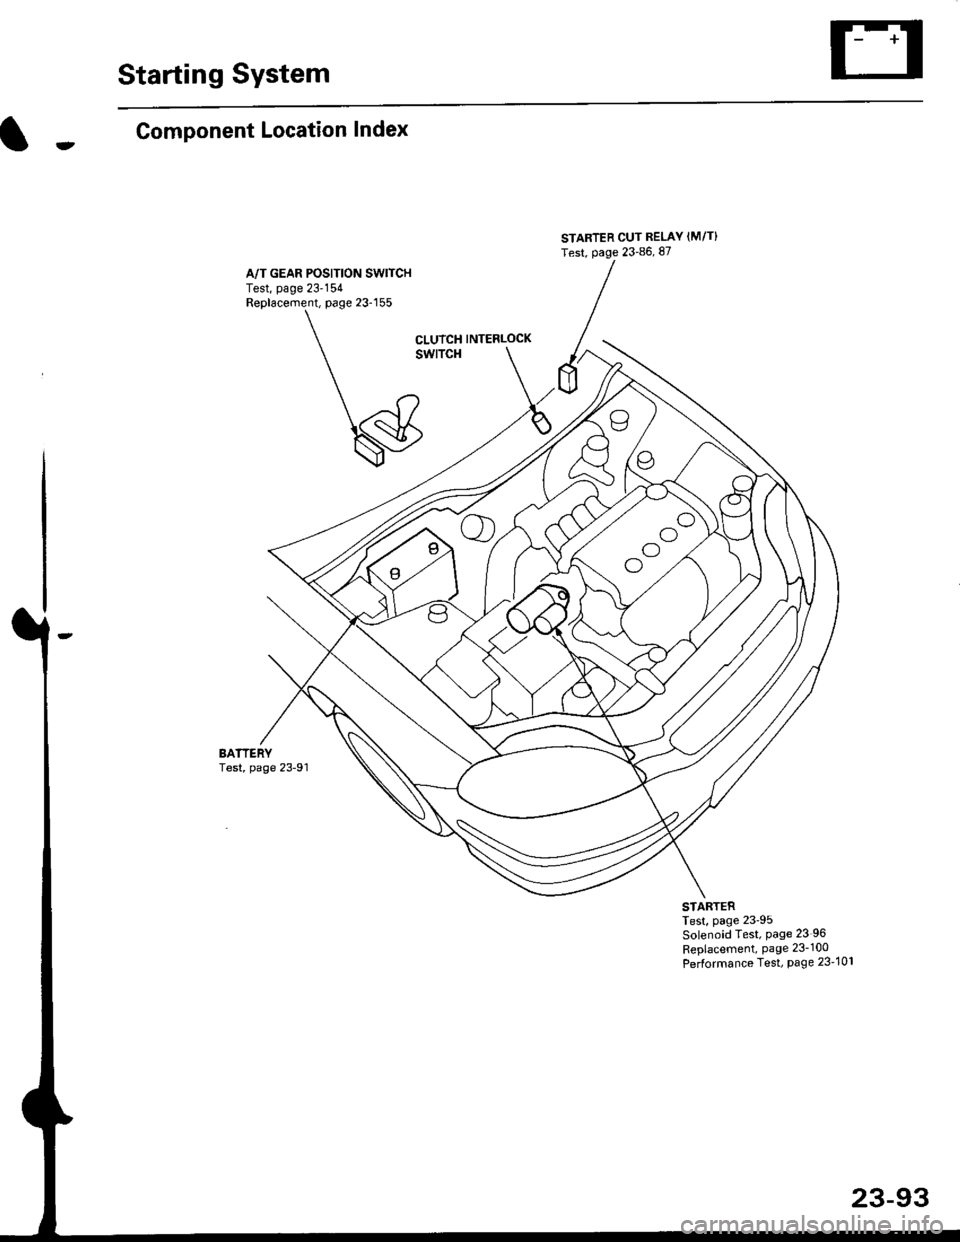 HONDA CIVIC 1997 6.G Workshop Manual Starting System
Component Location Index
A/T GEAR POSITION SW|TCHTest, page 23154Replacement, page 23-155
STARTER CUT RELAY (M/T}
Test, page 23-86, 87
oo
ool
CLUTCH INTERLOCK
swlTcH
BATTERYTest, page